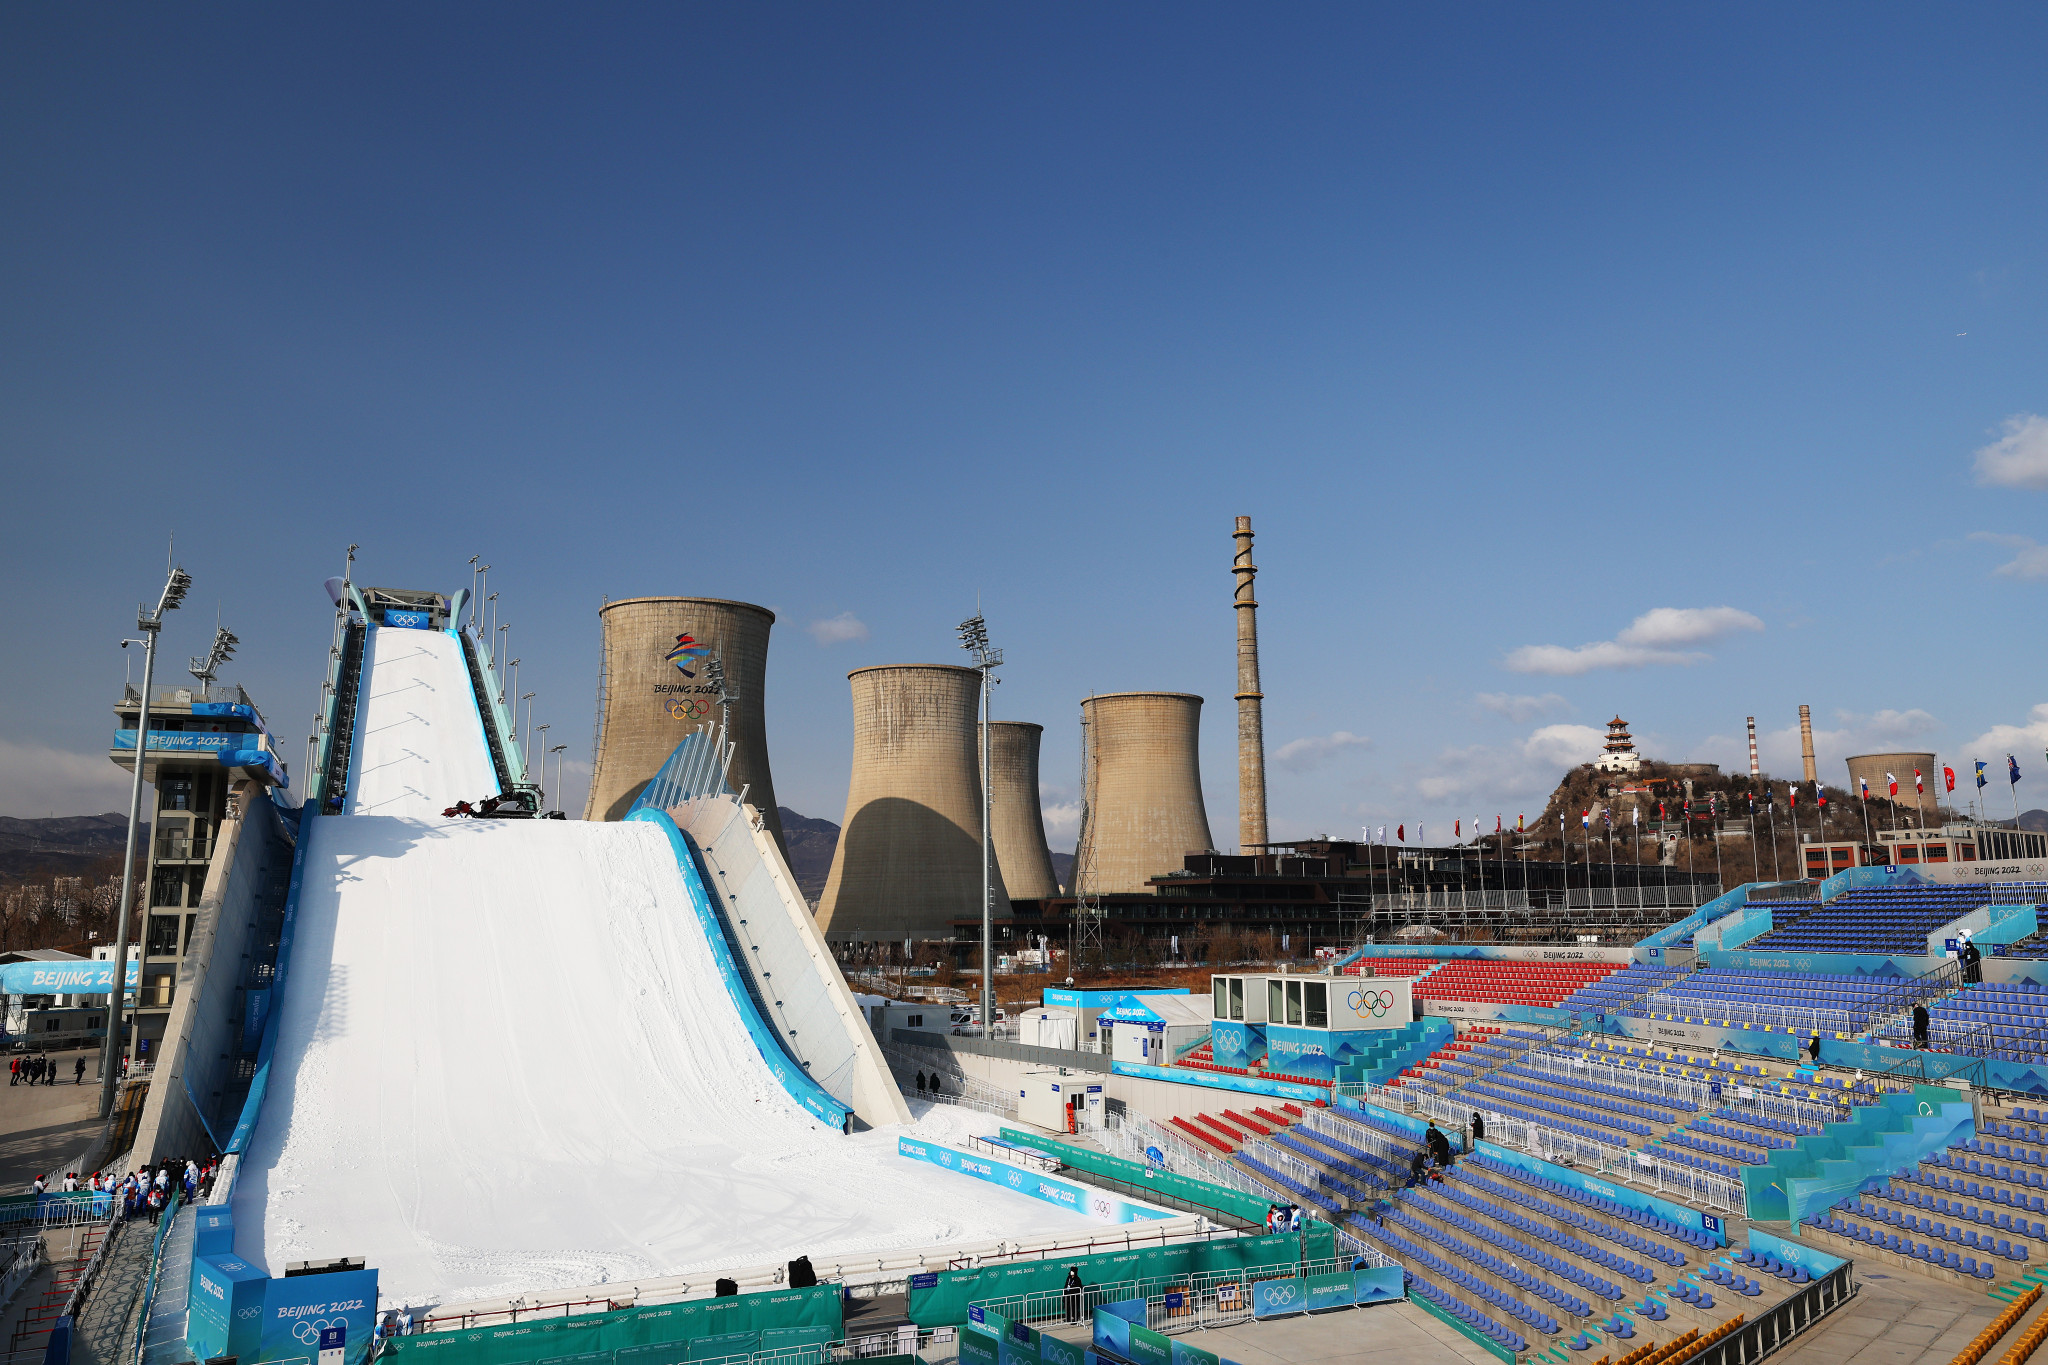 Beijing 2022 Winter Olympics Big Air venue set to be used for future events